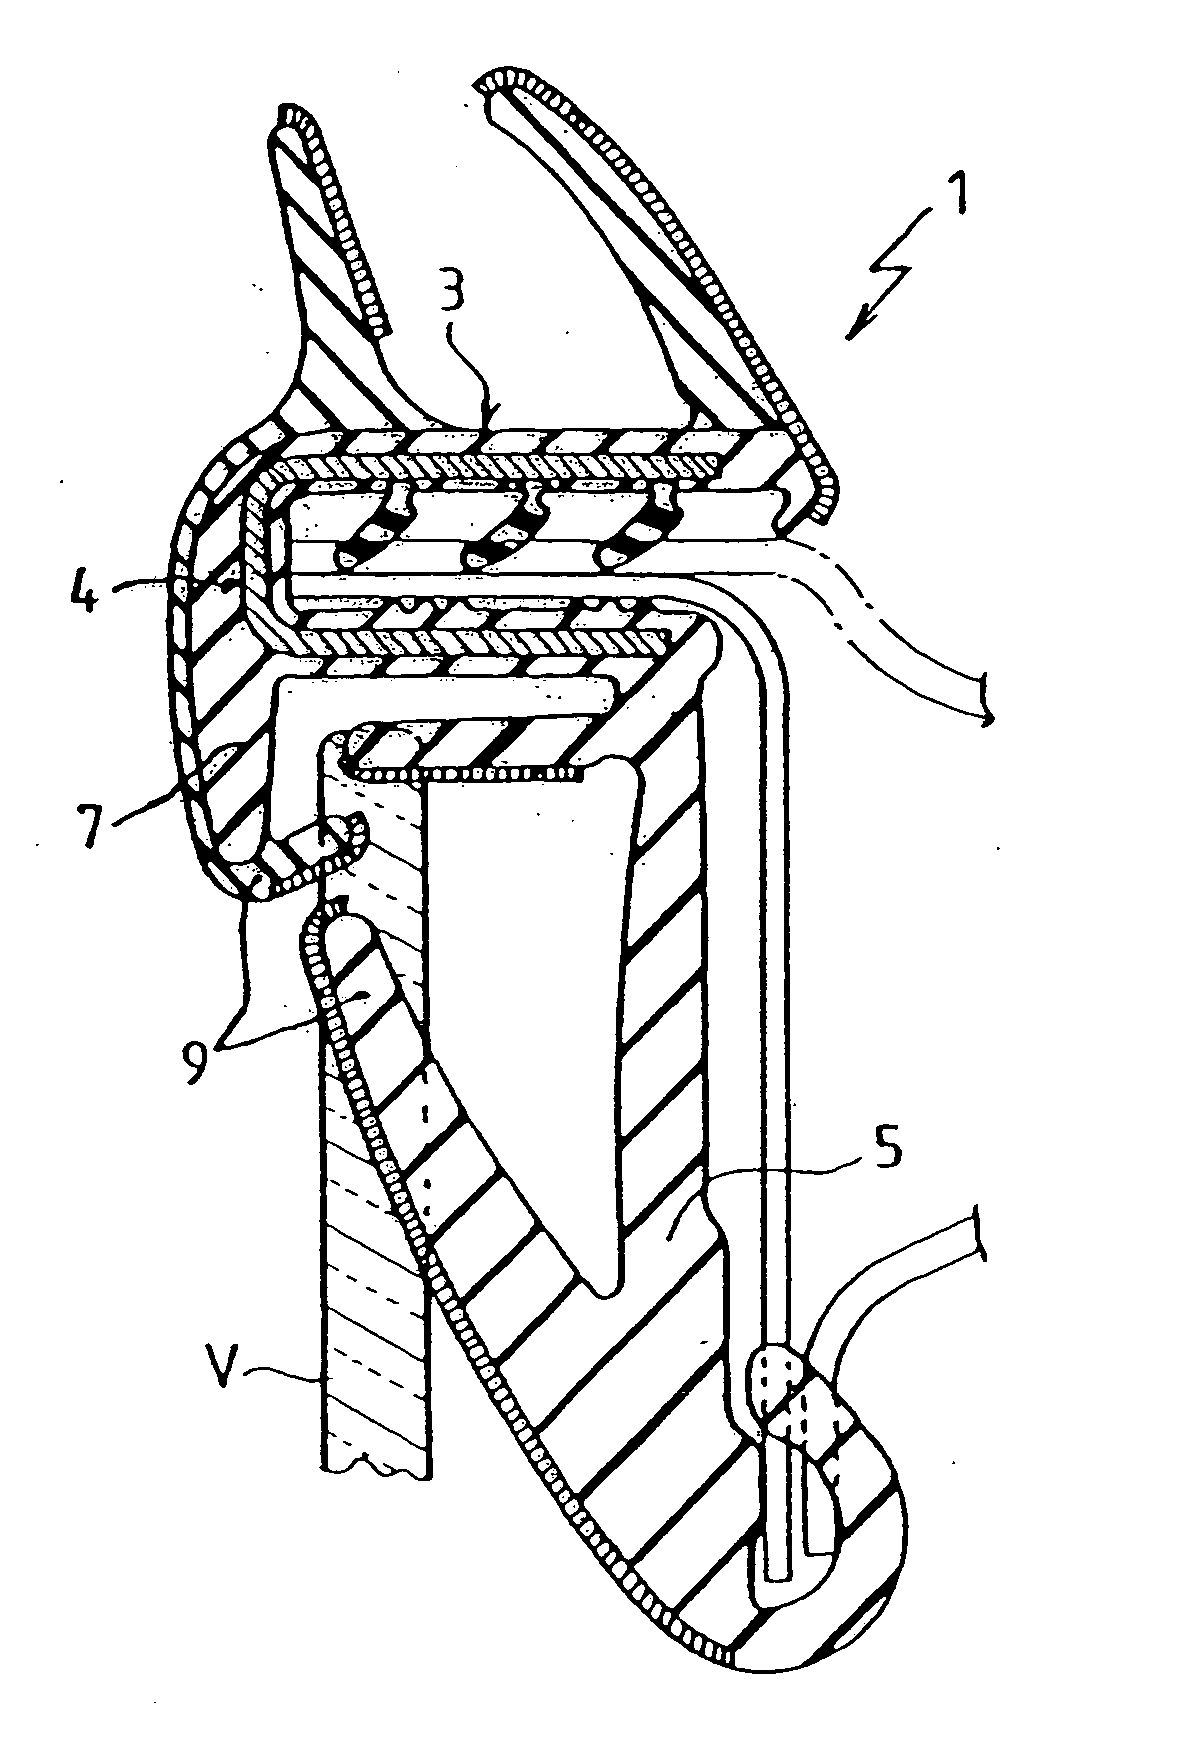 Method of manufacturing a sealing gasket, in particular a window run for a motor vehicle, and to a gasket manufactured in this way